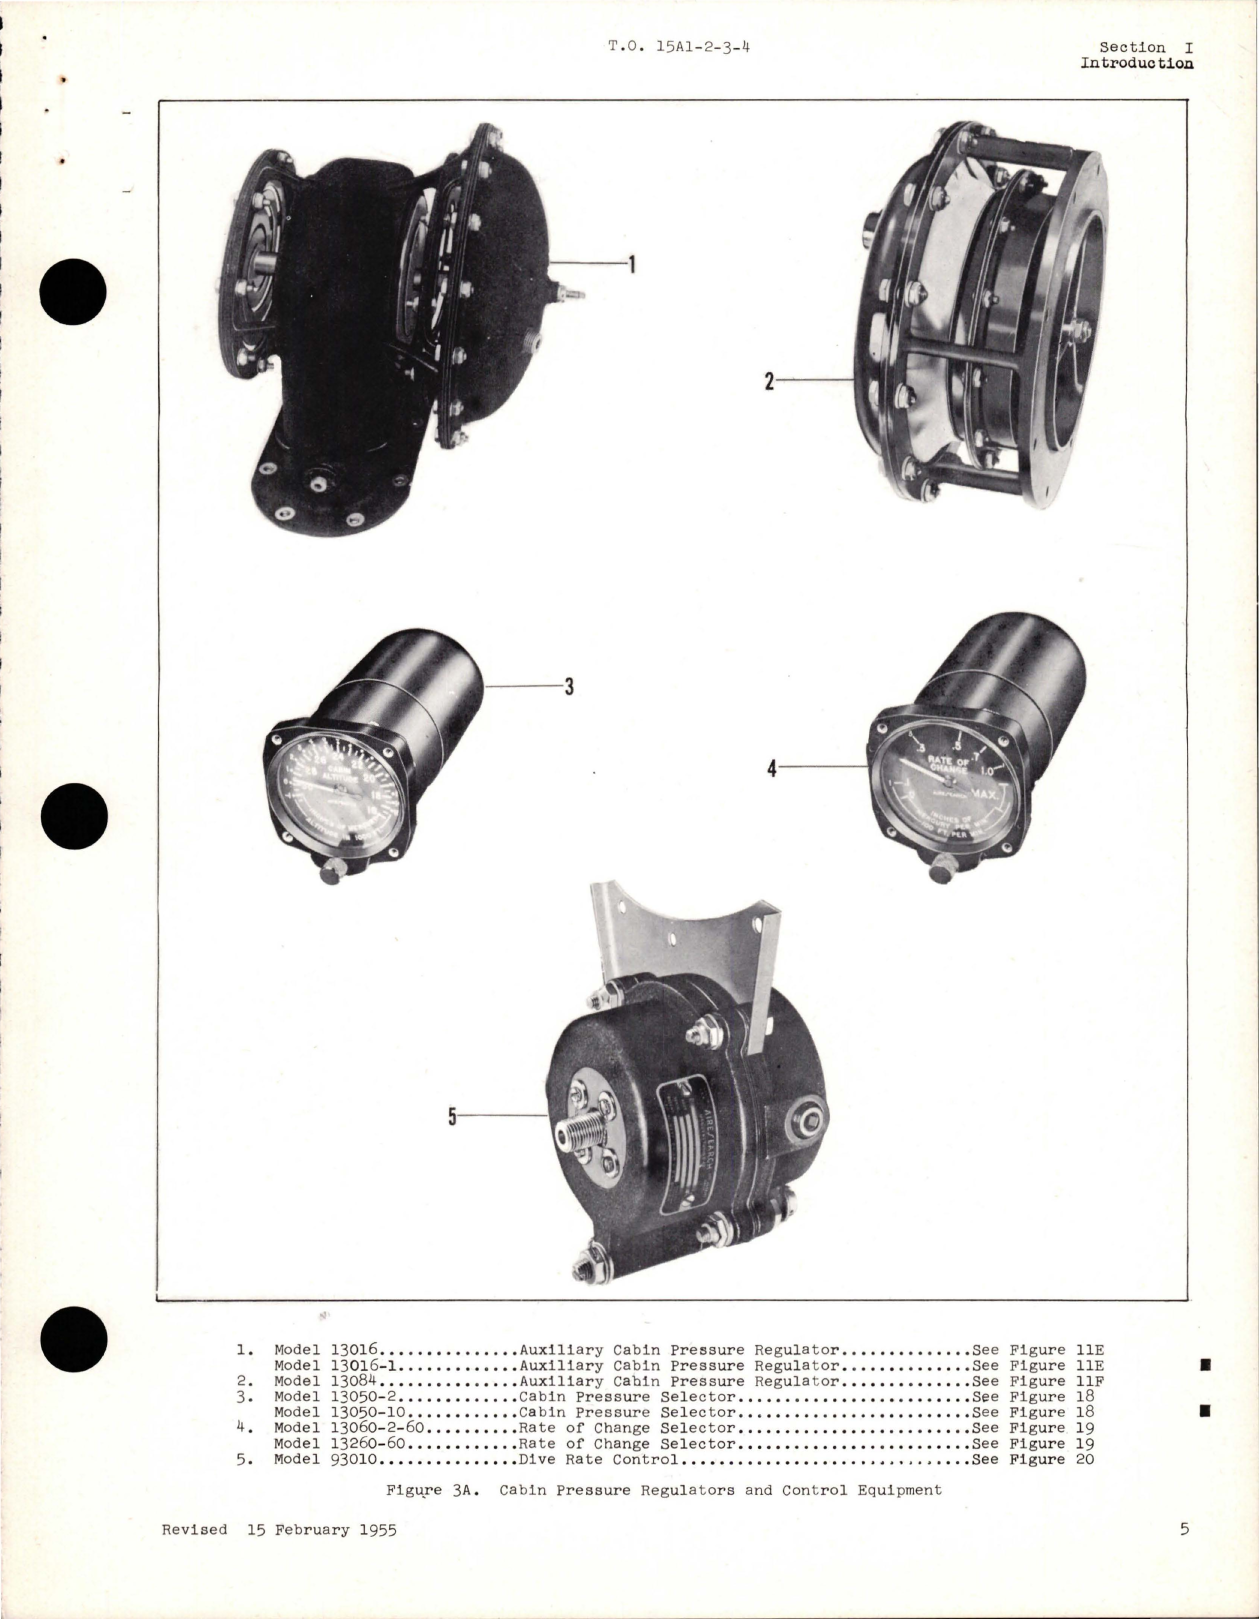 Sample page 9 from AirCorps Library document: Parts Catalog for Cabin Pressure Regulators